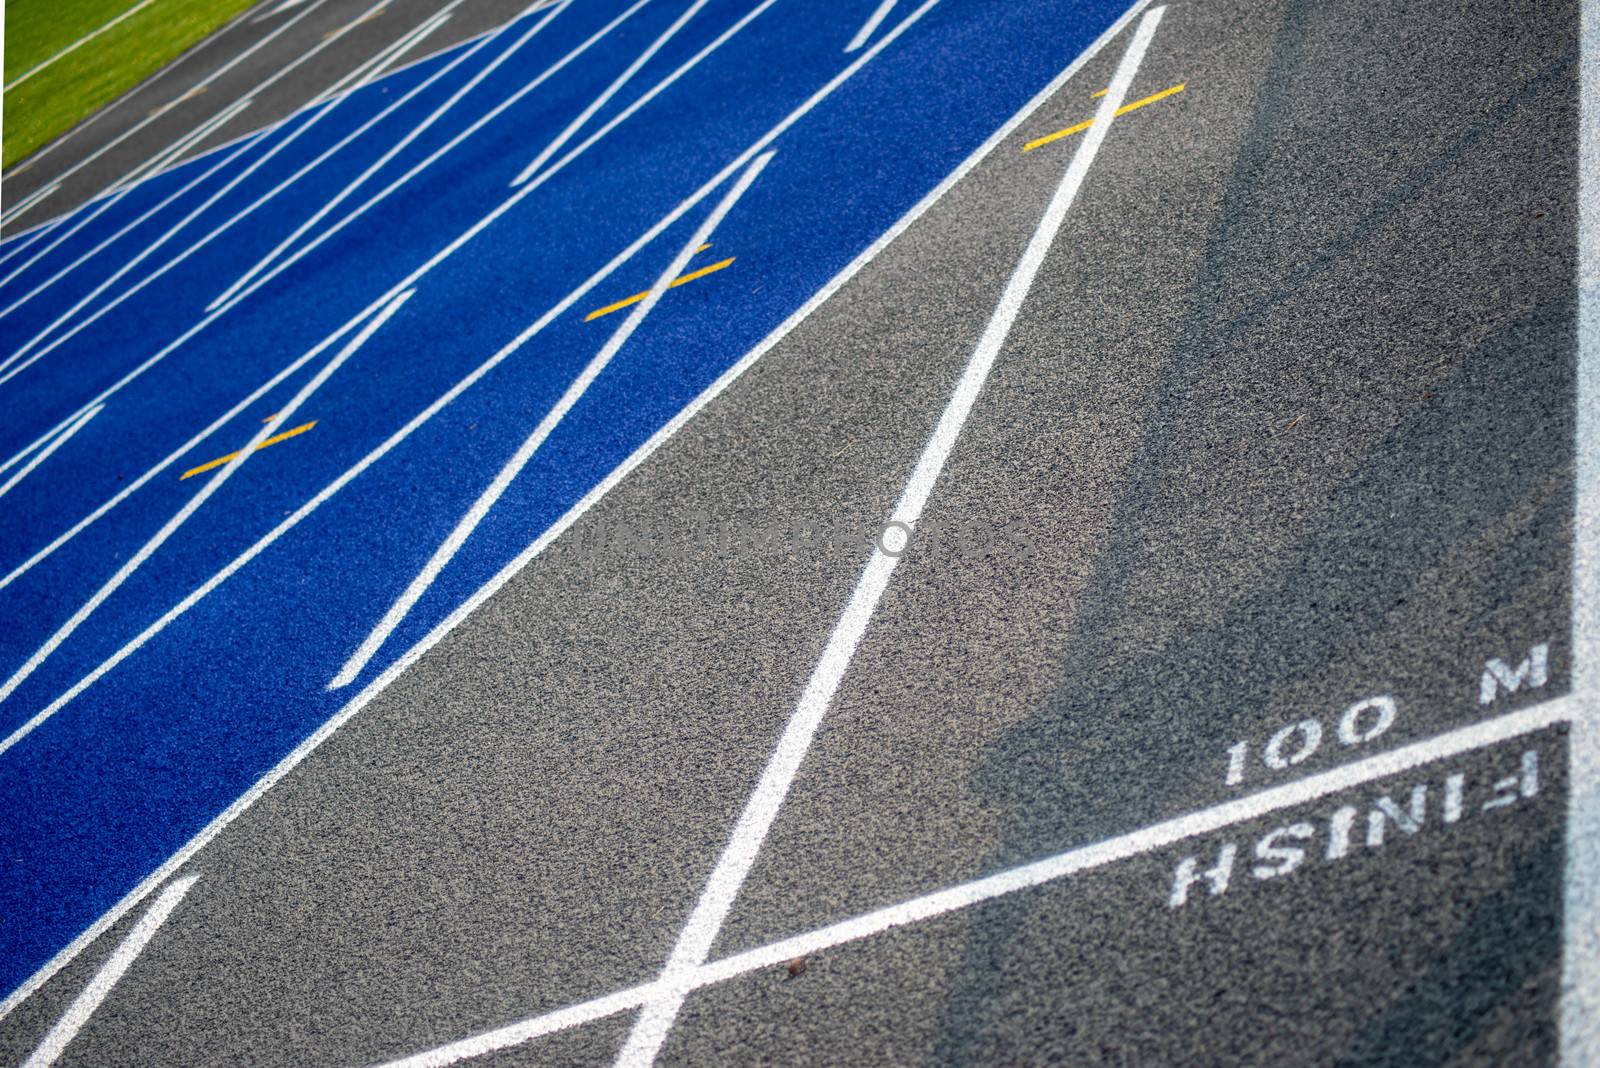 Full frame image in natural light of textured surface of a clean, new outdoor blue and gray running track with crisp fresh white lines and copy space. Green grass in the background.